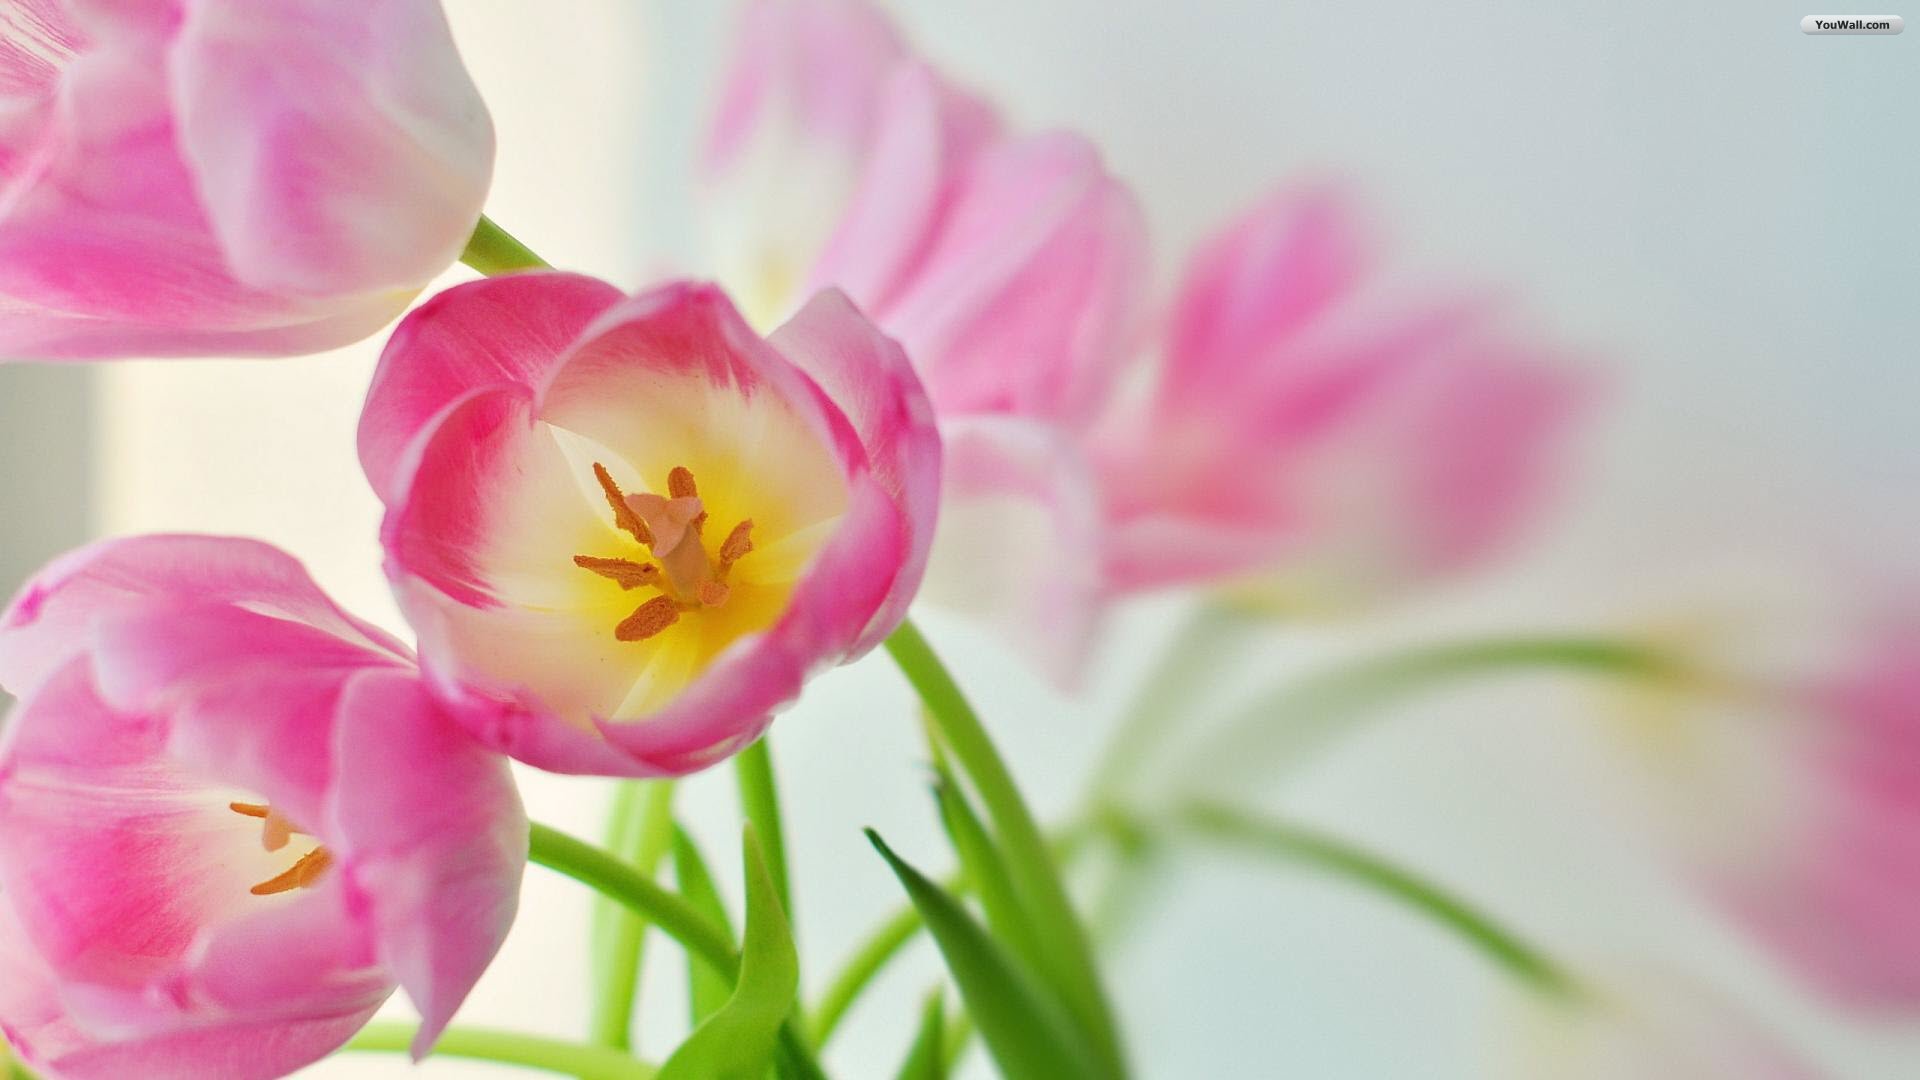 Tulips Wallpapers for Computer Desktop | Full HD Pictures